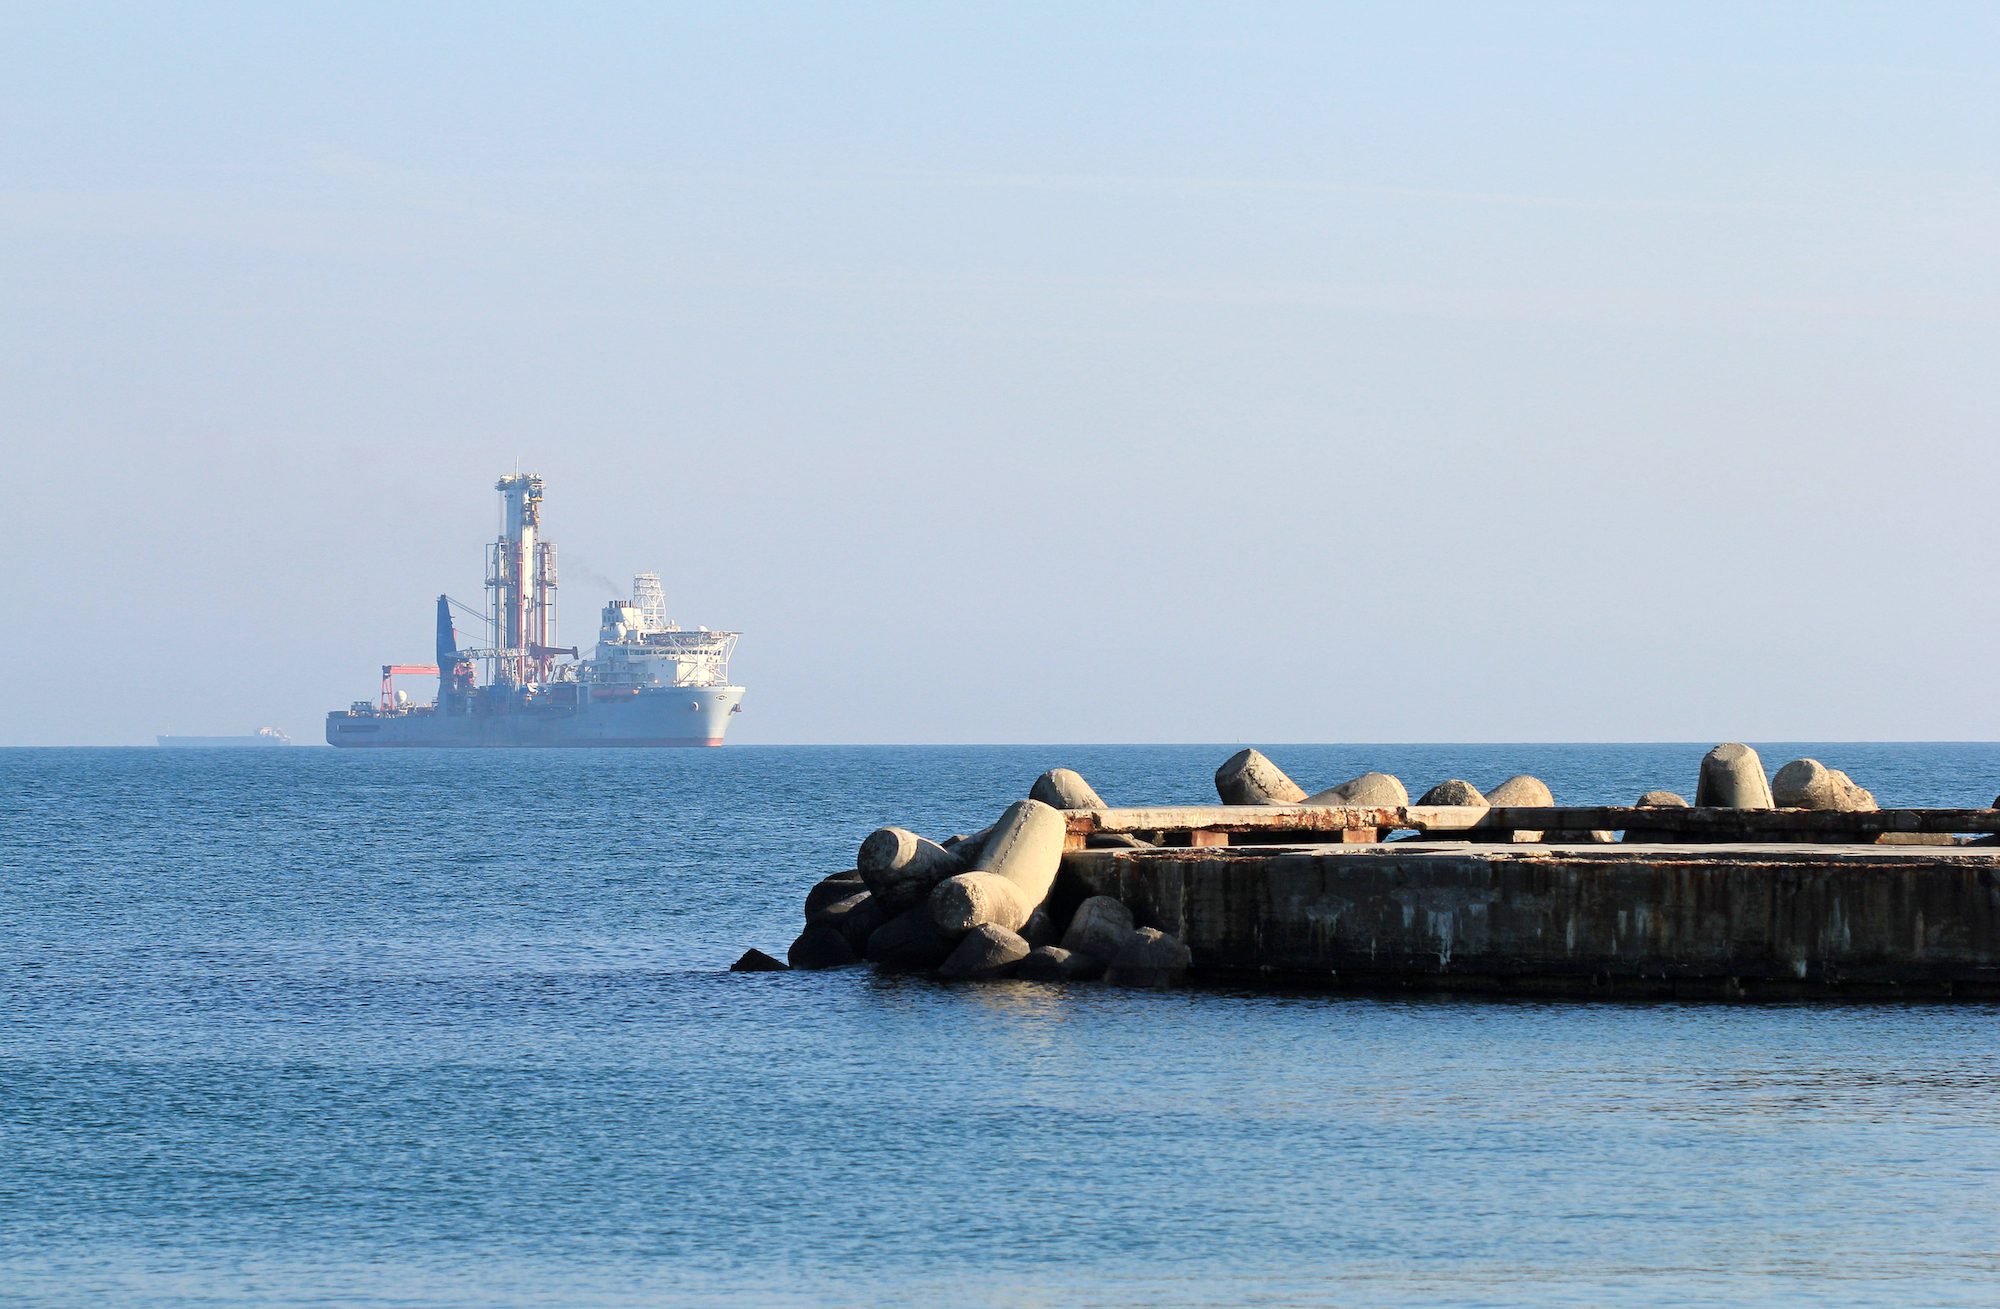 The drilling ship Noble Globetrotter II off the coast of Varna, Bulgaria